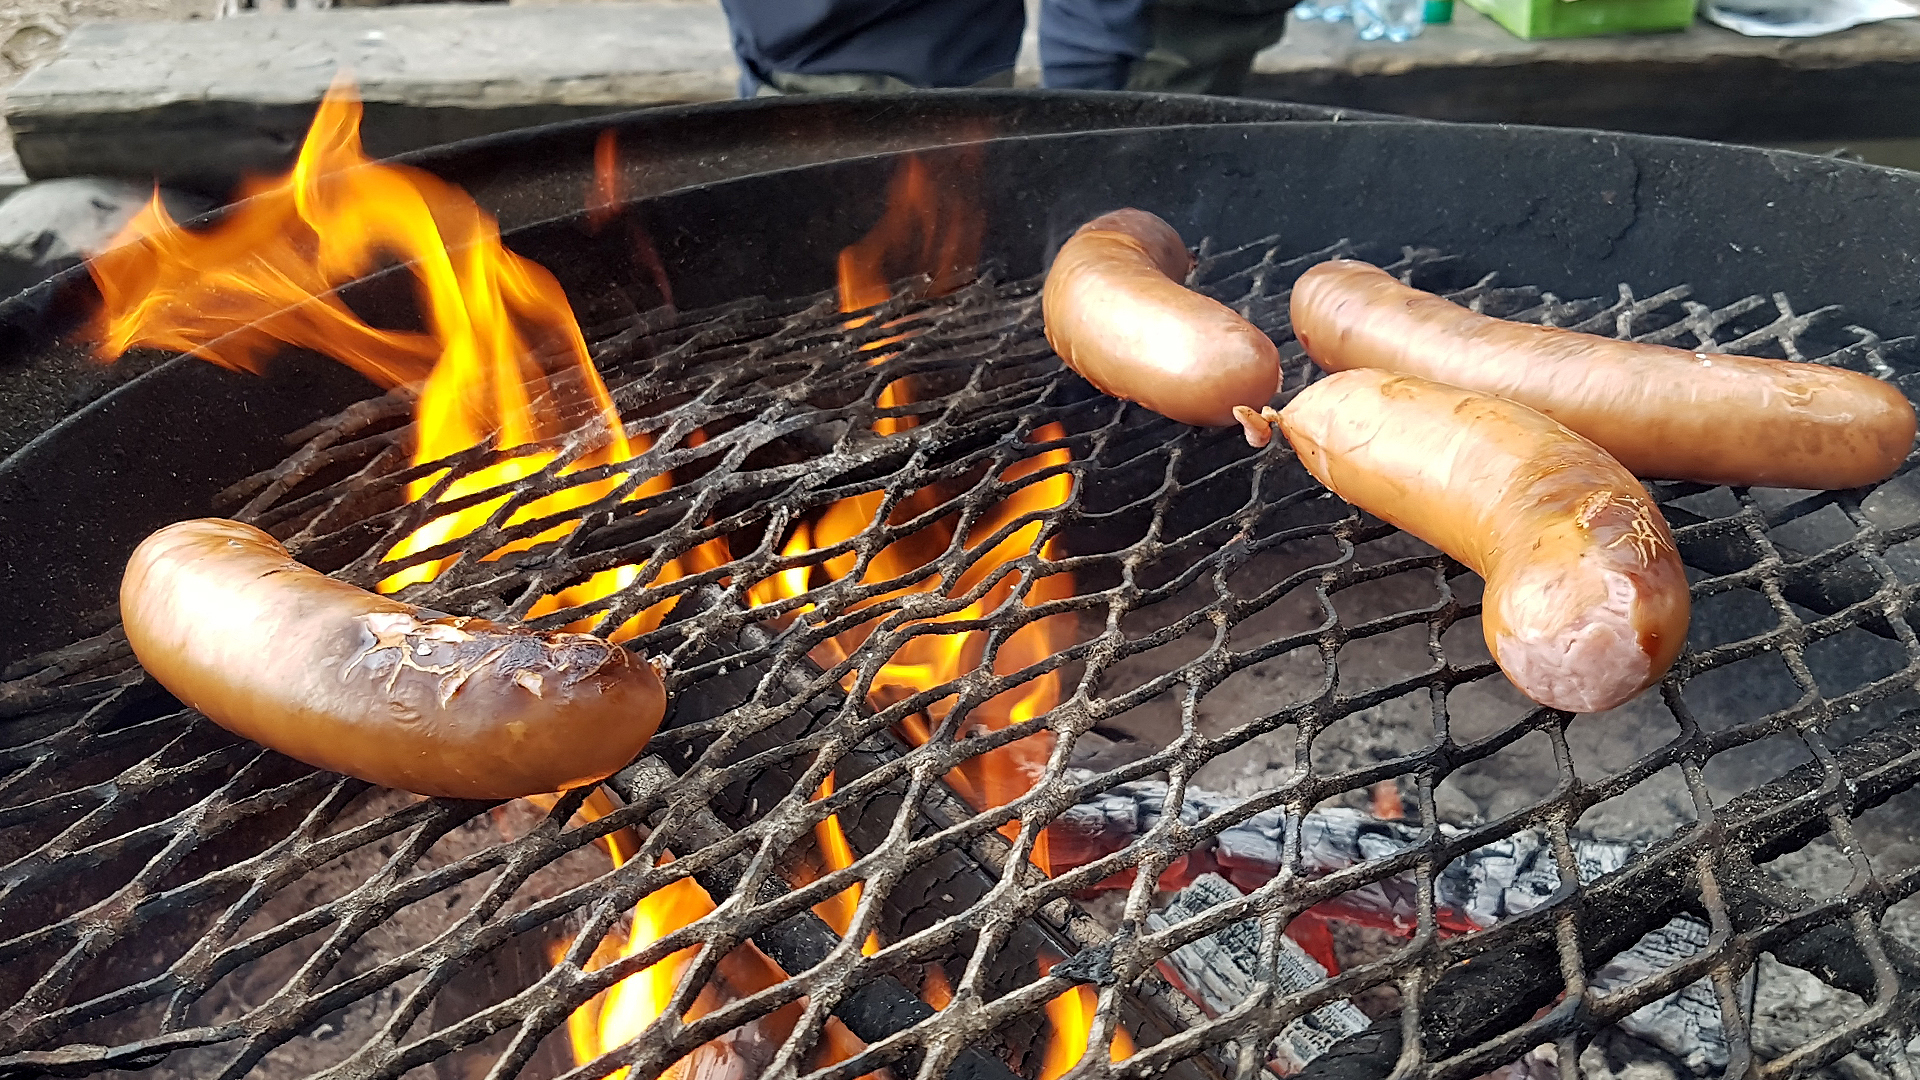 The meat industry is preparing for the demand for hot sausage over the Midsummer weekend